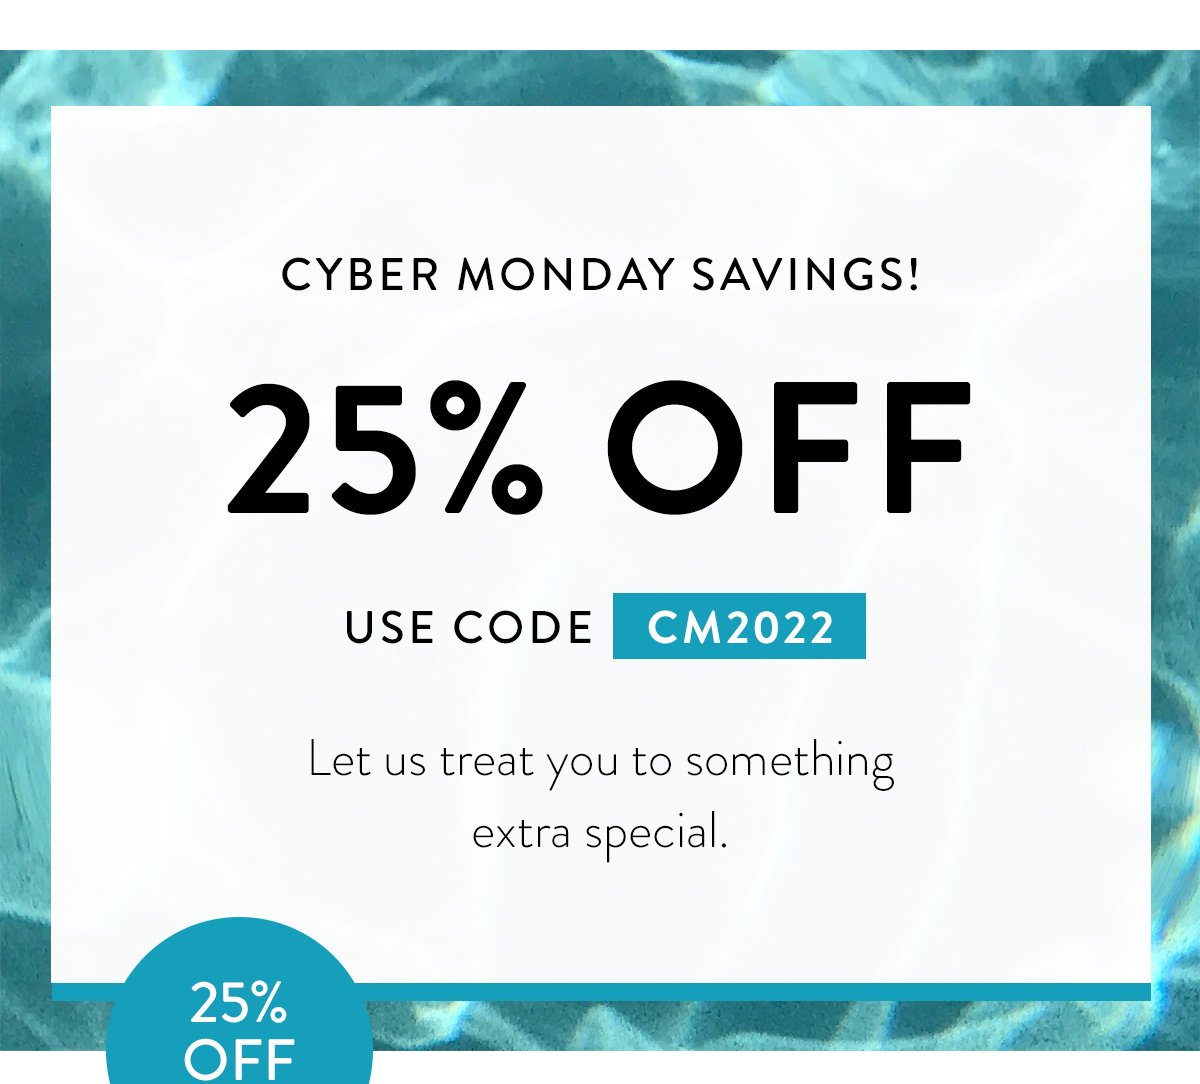 CYBER MONDAY SAVINGS! / 25% OFF / USE CODE CM2022 / Let us treat you to something extra special.